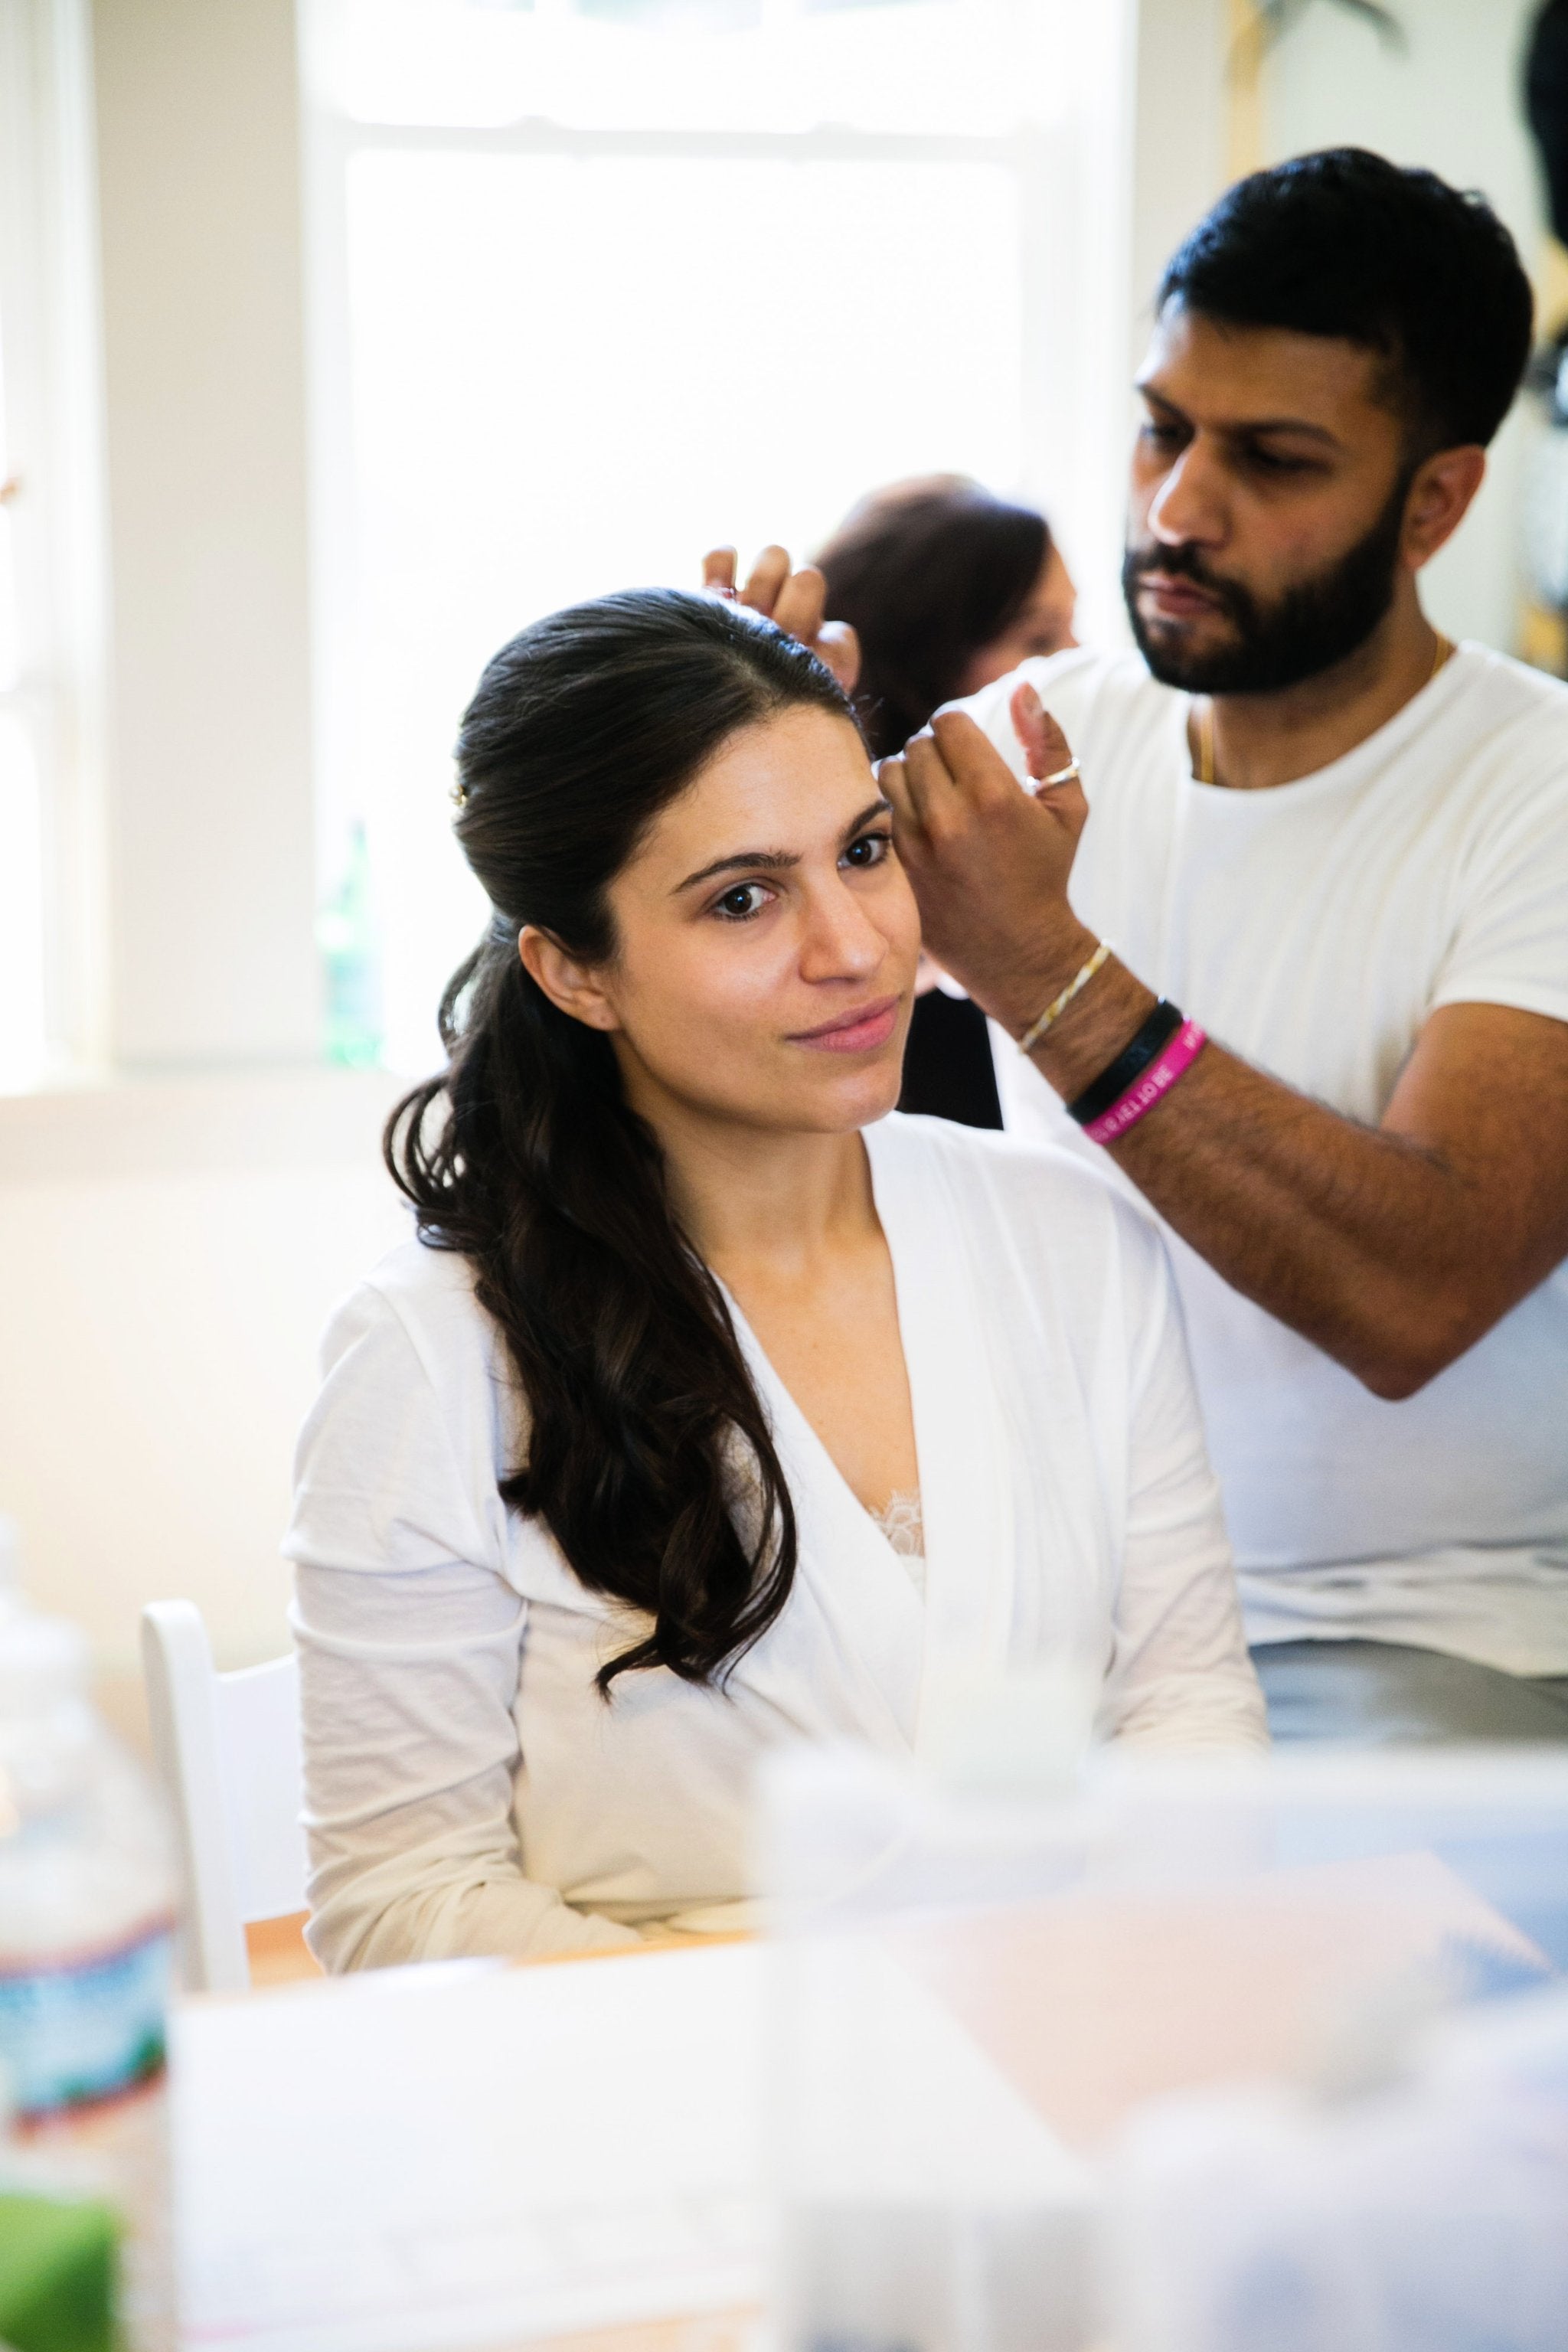 How To Get Rid Of Pimples On Your Wedding Day